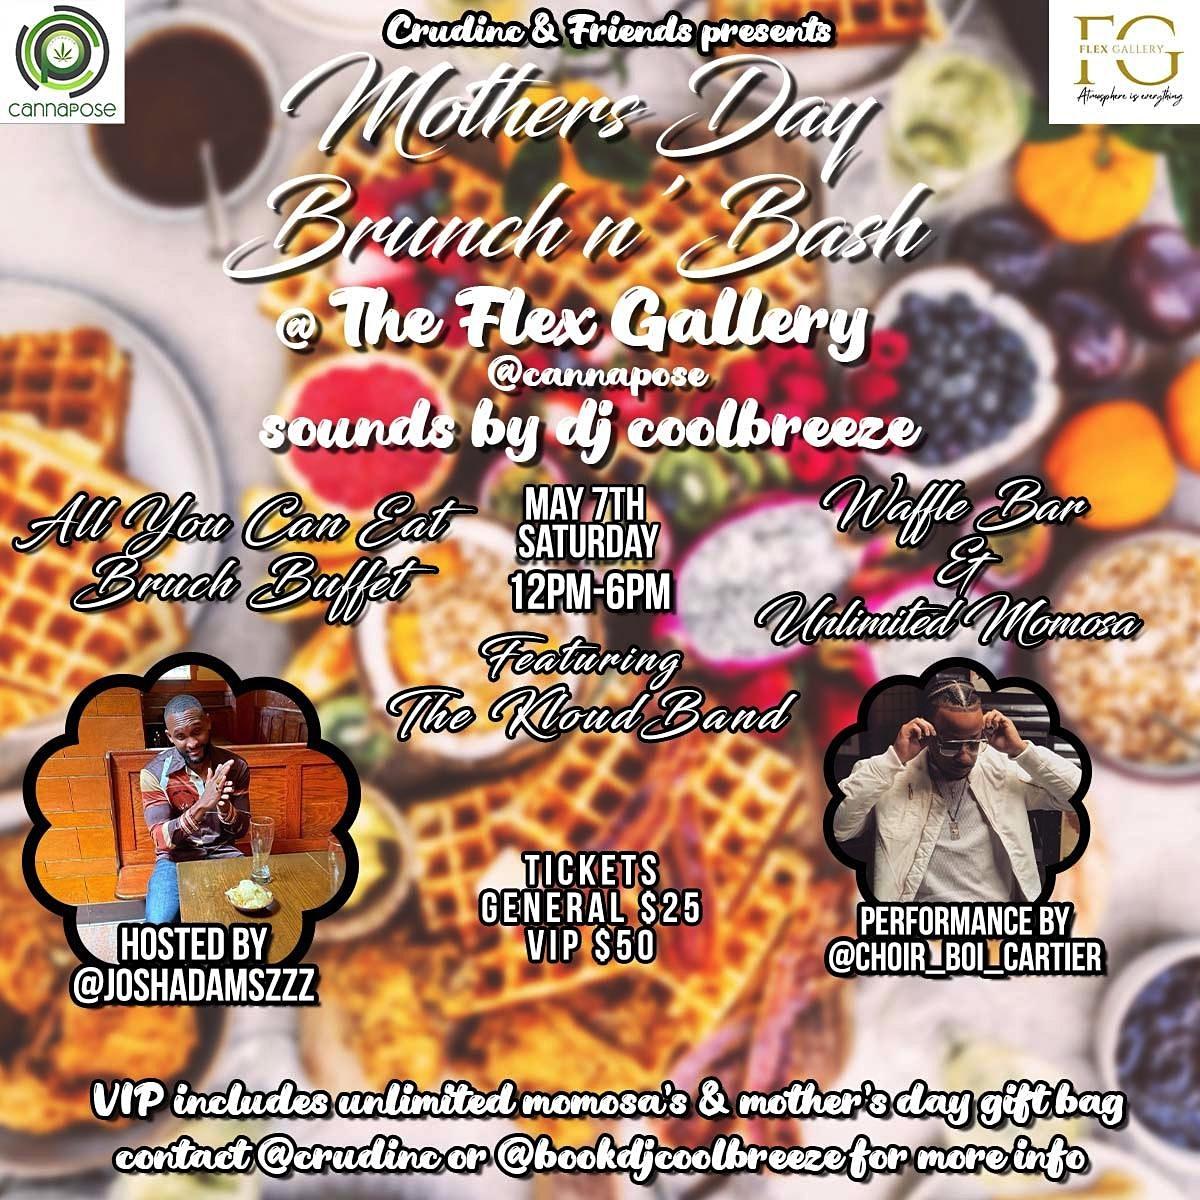 Mother’s Day Brunch and Bash